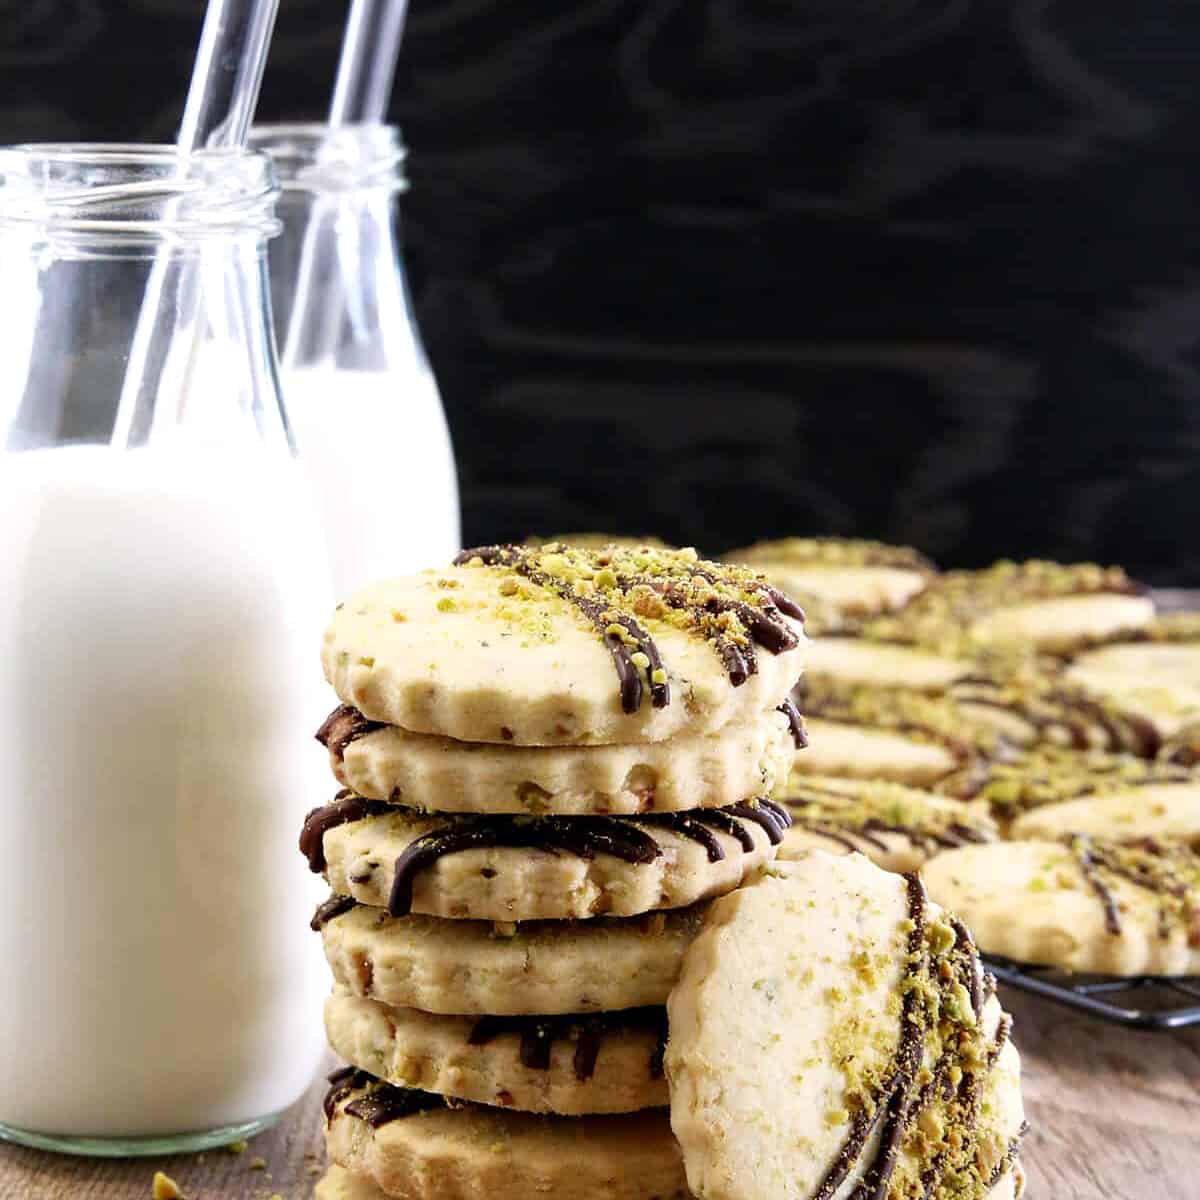 Move over chocolate chip cookies, these delicious cookies may just become a new favorite. What goes great with a treat like these Easy Pistachio Dark Chocolate Drizzle Shortbread Cookies? You're right, cold milk!